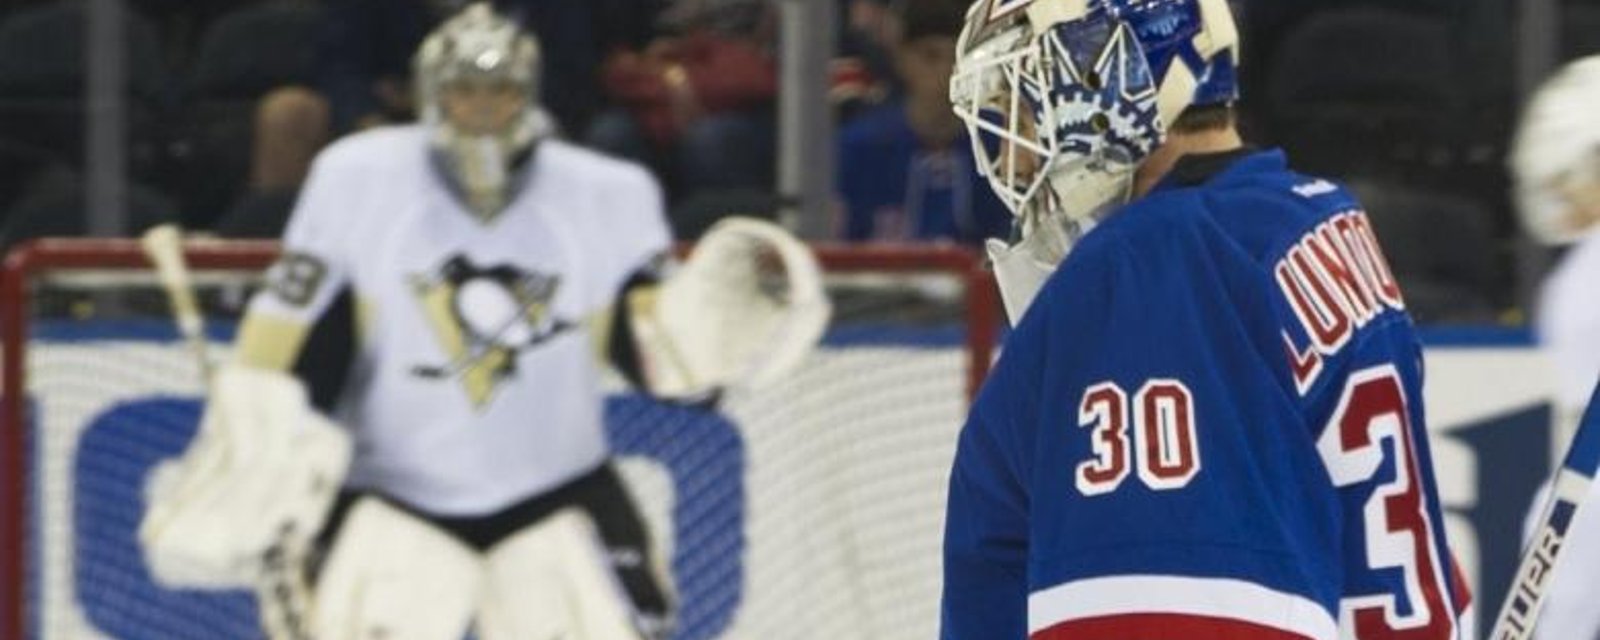 Fleury refers to Lundqvist's outburst as 'baby stuff'.